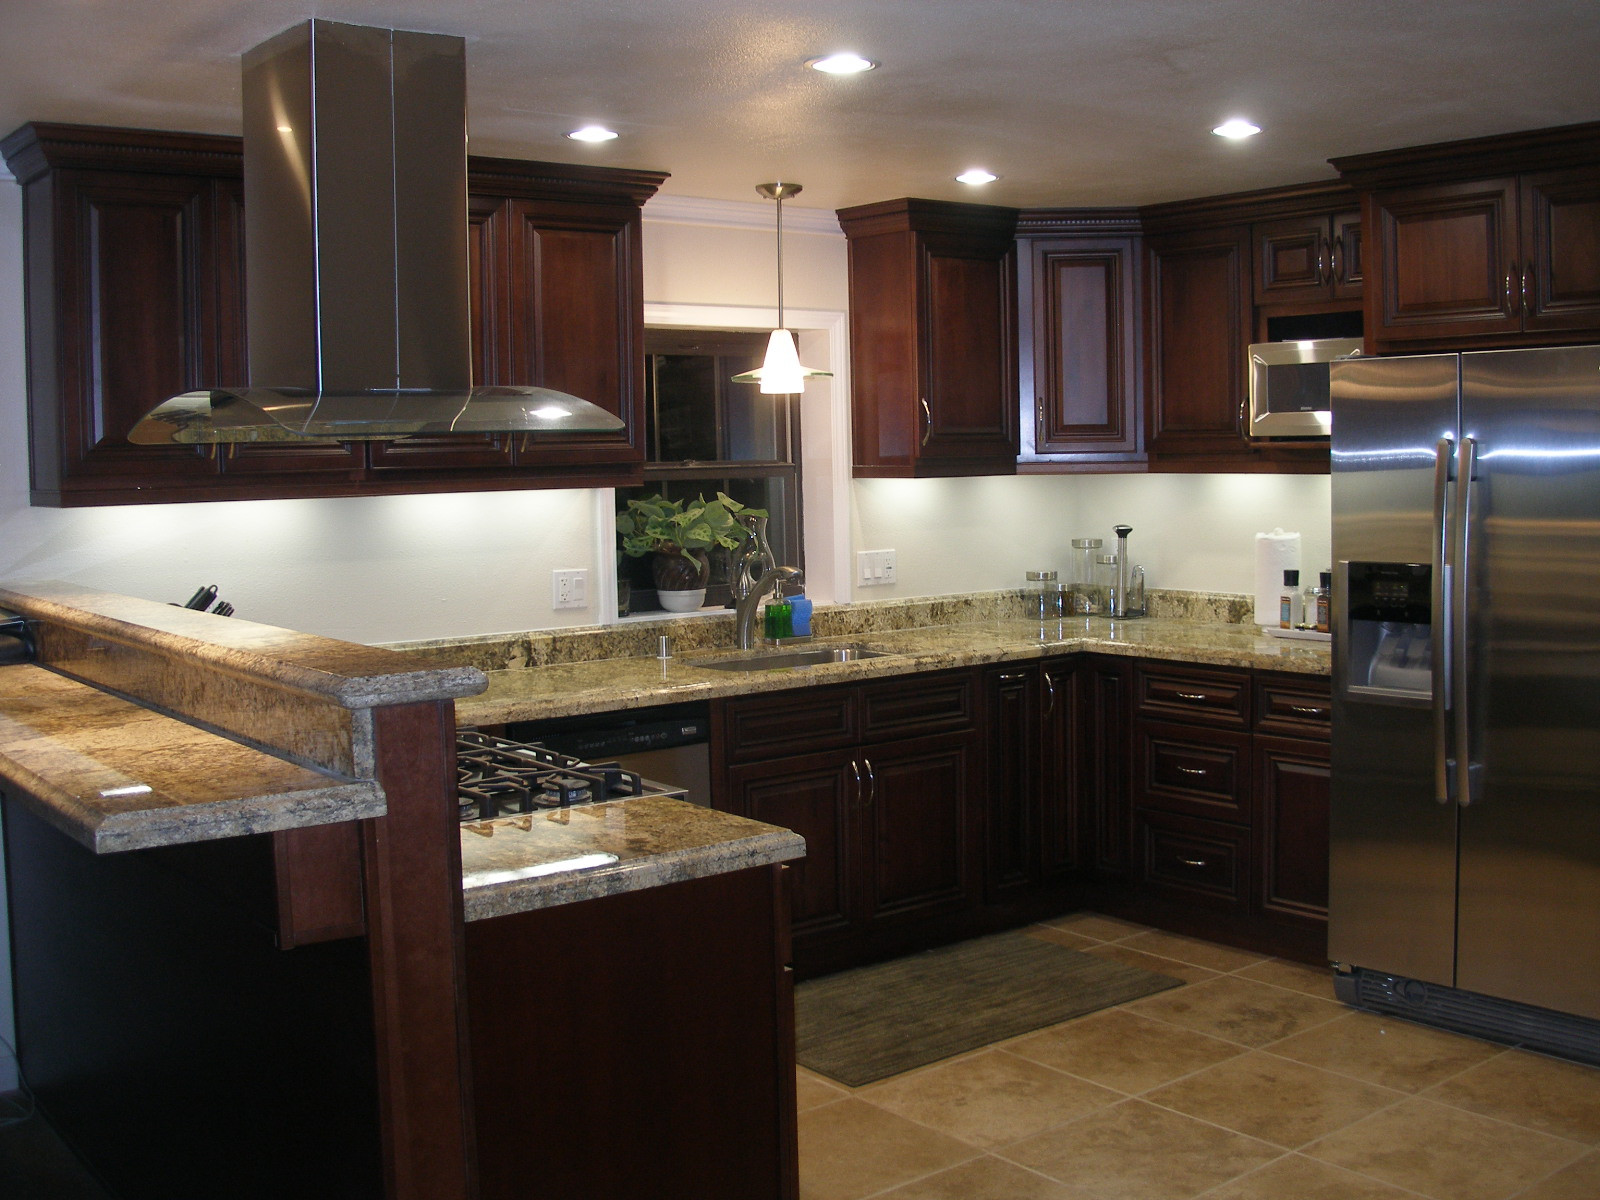 Remodel Small Kitchen
 Kitchen Remodeling